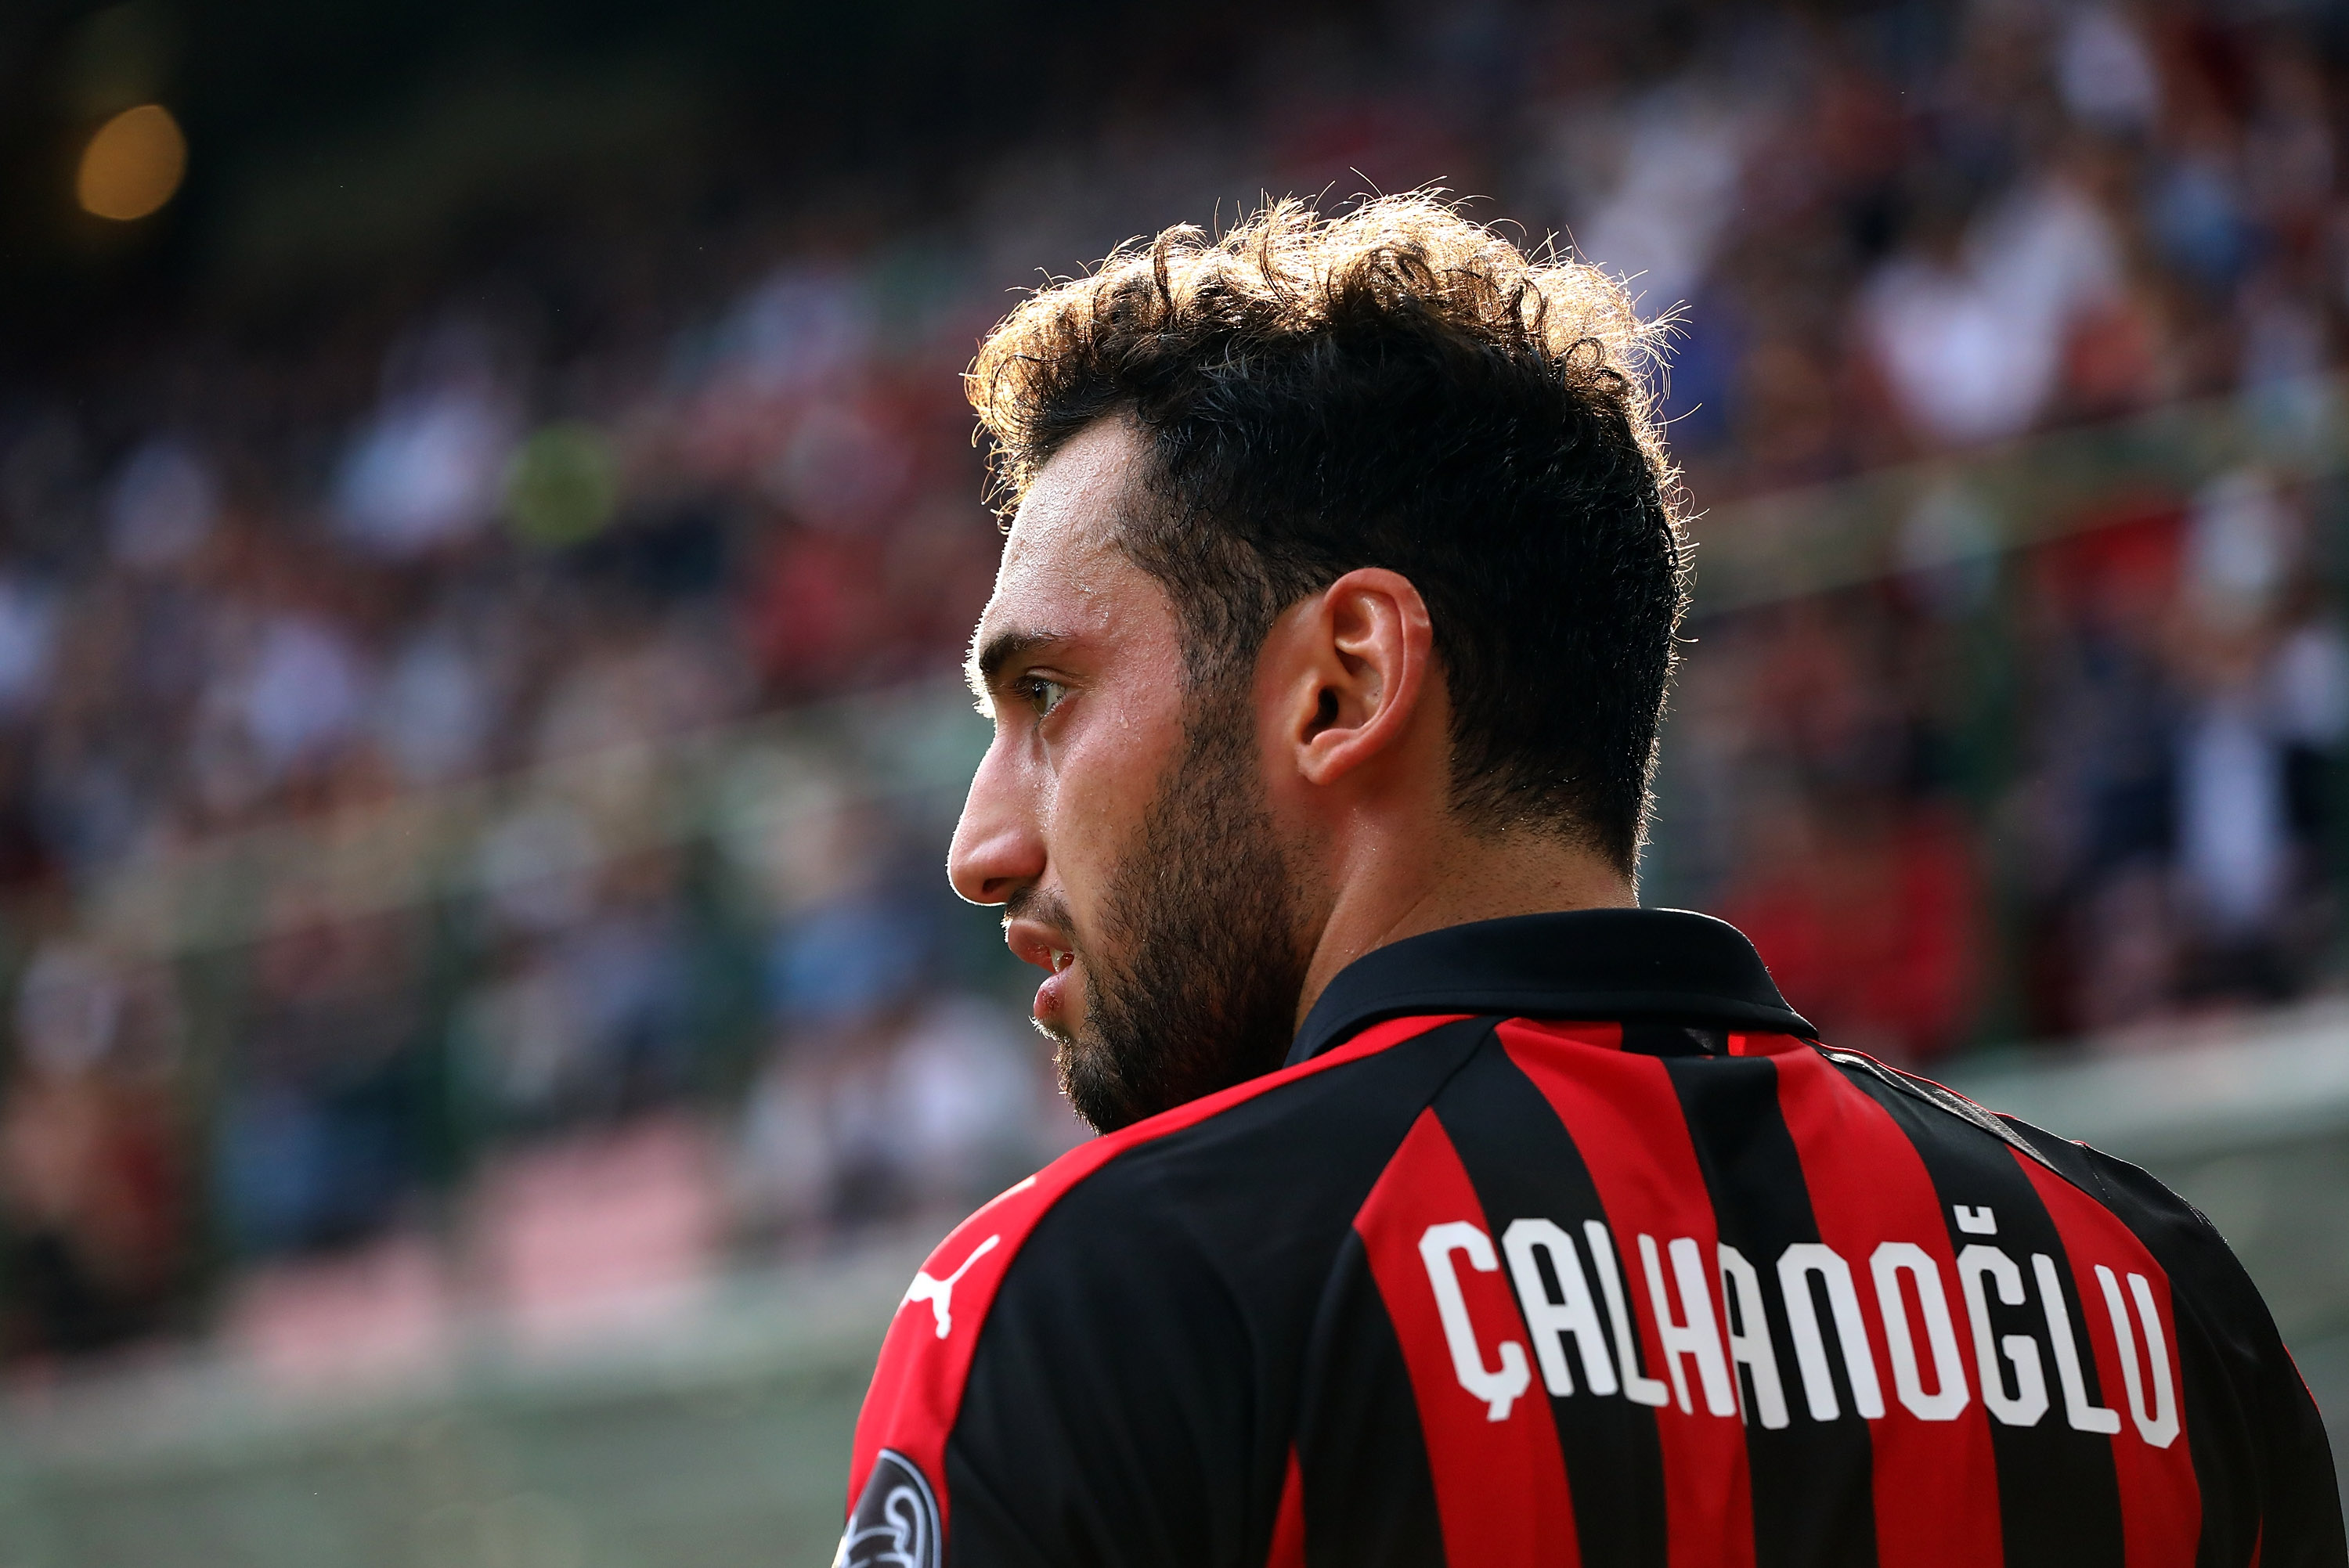 MILAN, ITALY - OCTOBER 07: Hakan Calhanoglu of AC Milan looks on during the Serie A match between AC Milan and Chievo Verona at Stadio Giuseppe Meazza on October 7, 2018 in Milan, Italy. (Photo by Marco Luzzani/Getty Images)